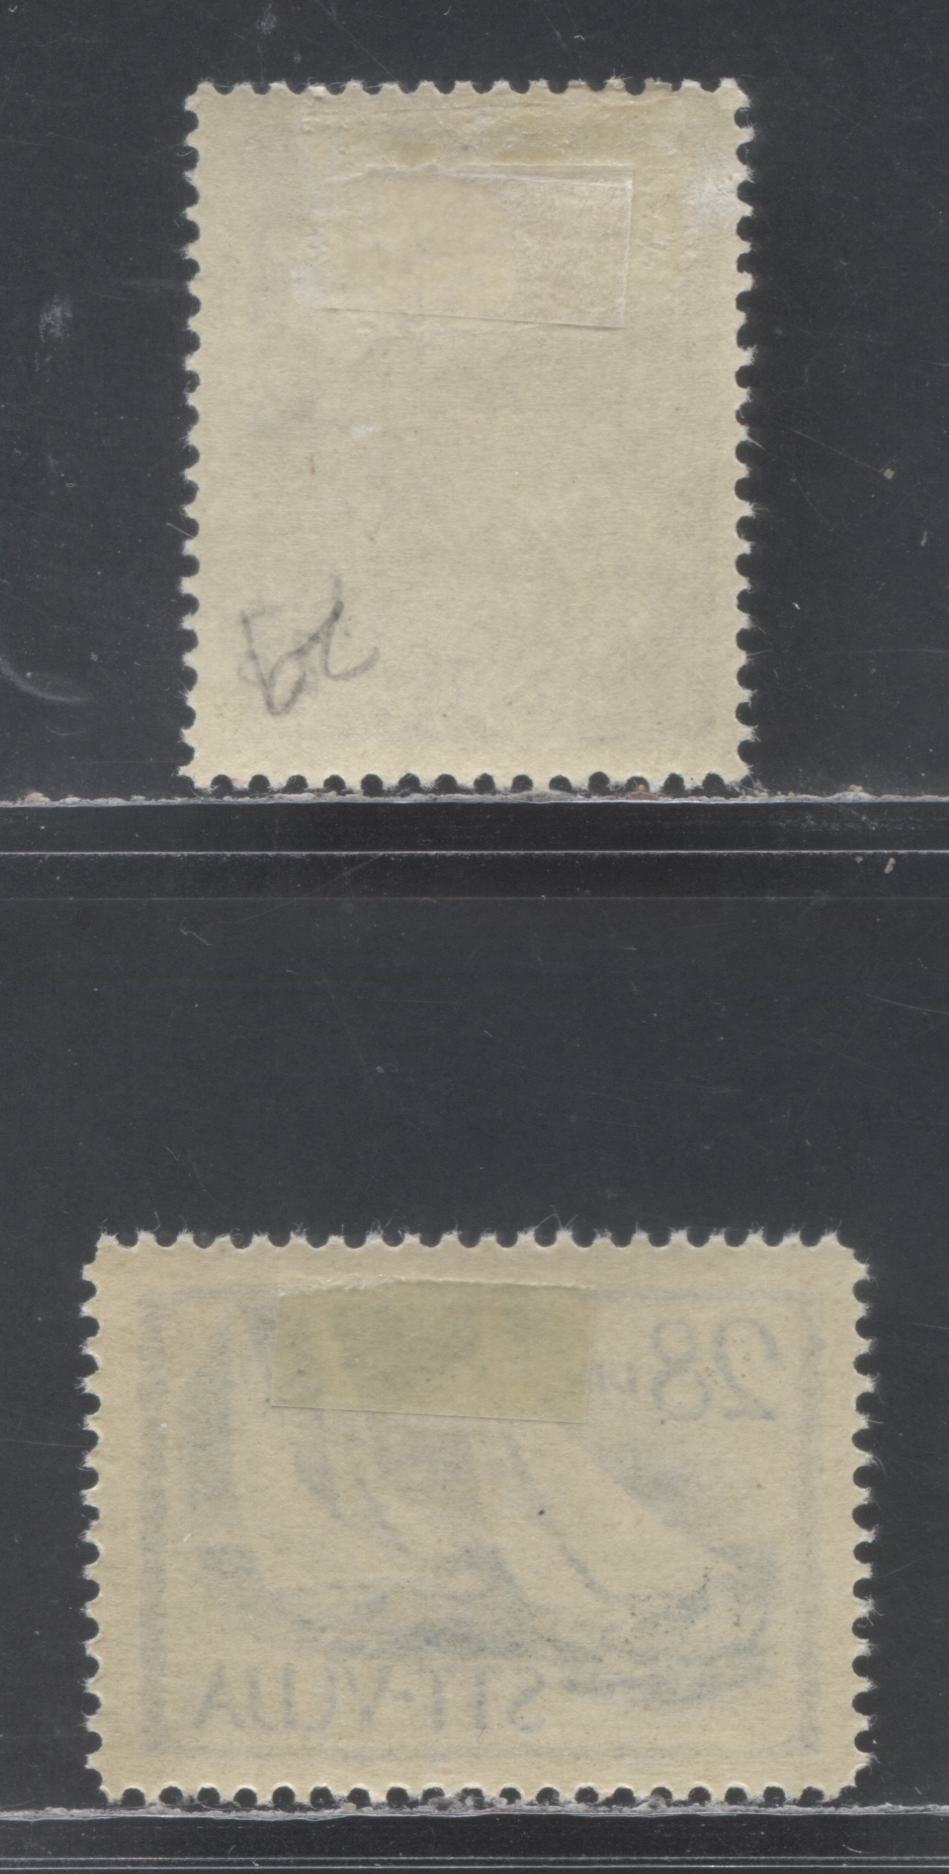 Yugoslavia - Istria & Slovene Coast SC#29/45 1952 Airmail Definitives - Sports Yugoslavia-Trieste Issues, 2 F/VFOG Singles, Click on Listing to See ALL Pictures, Estimated Value $11